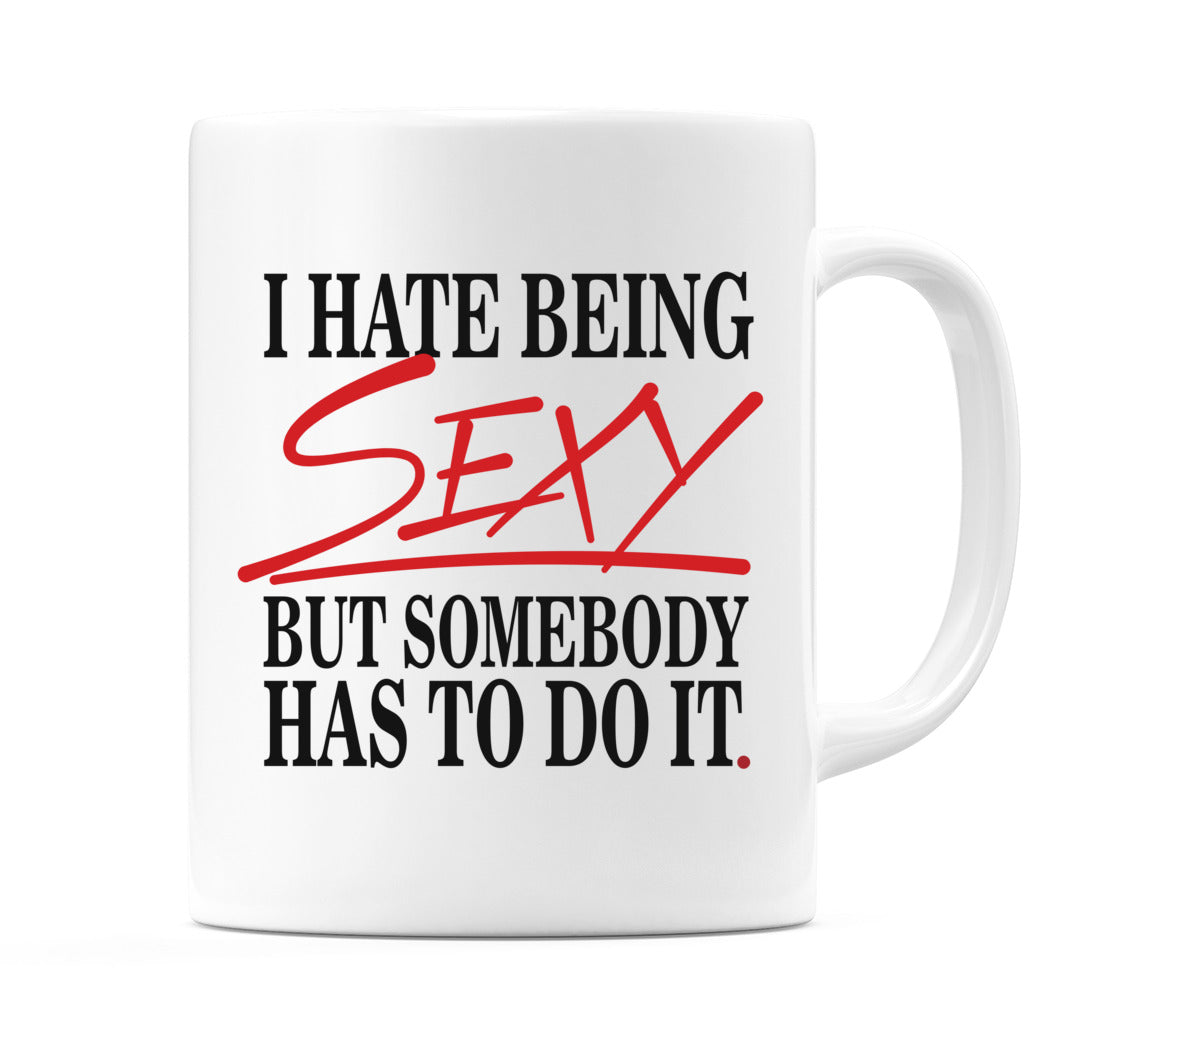 I Hate Being Sexy But Somebody Has To Do It. Mug